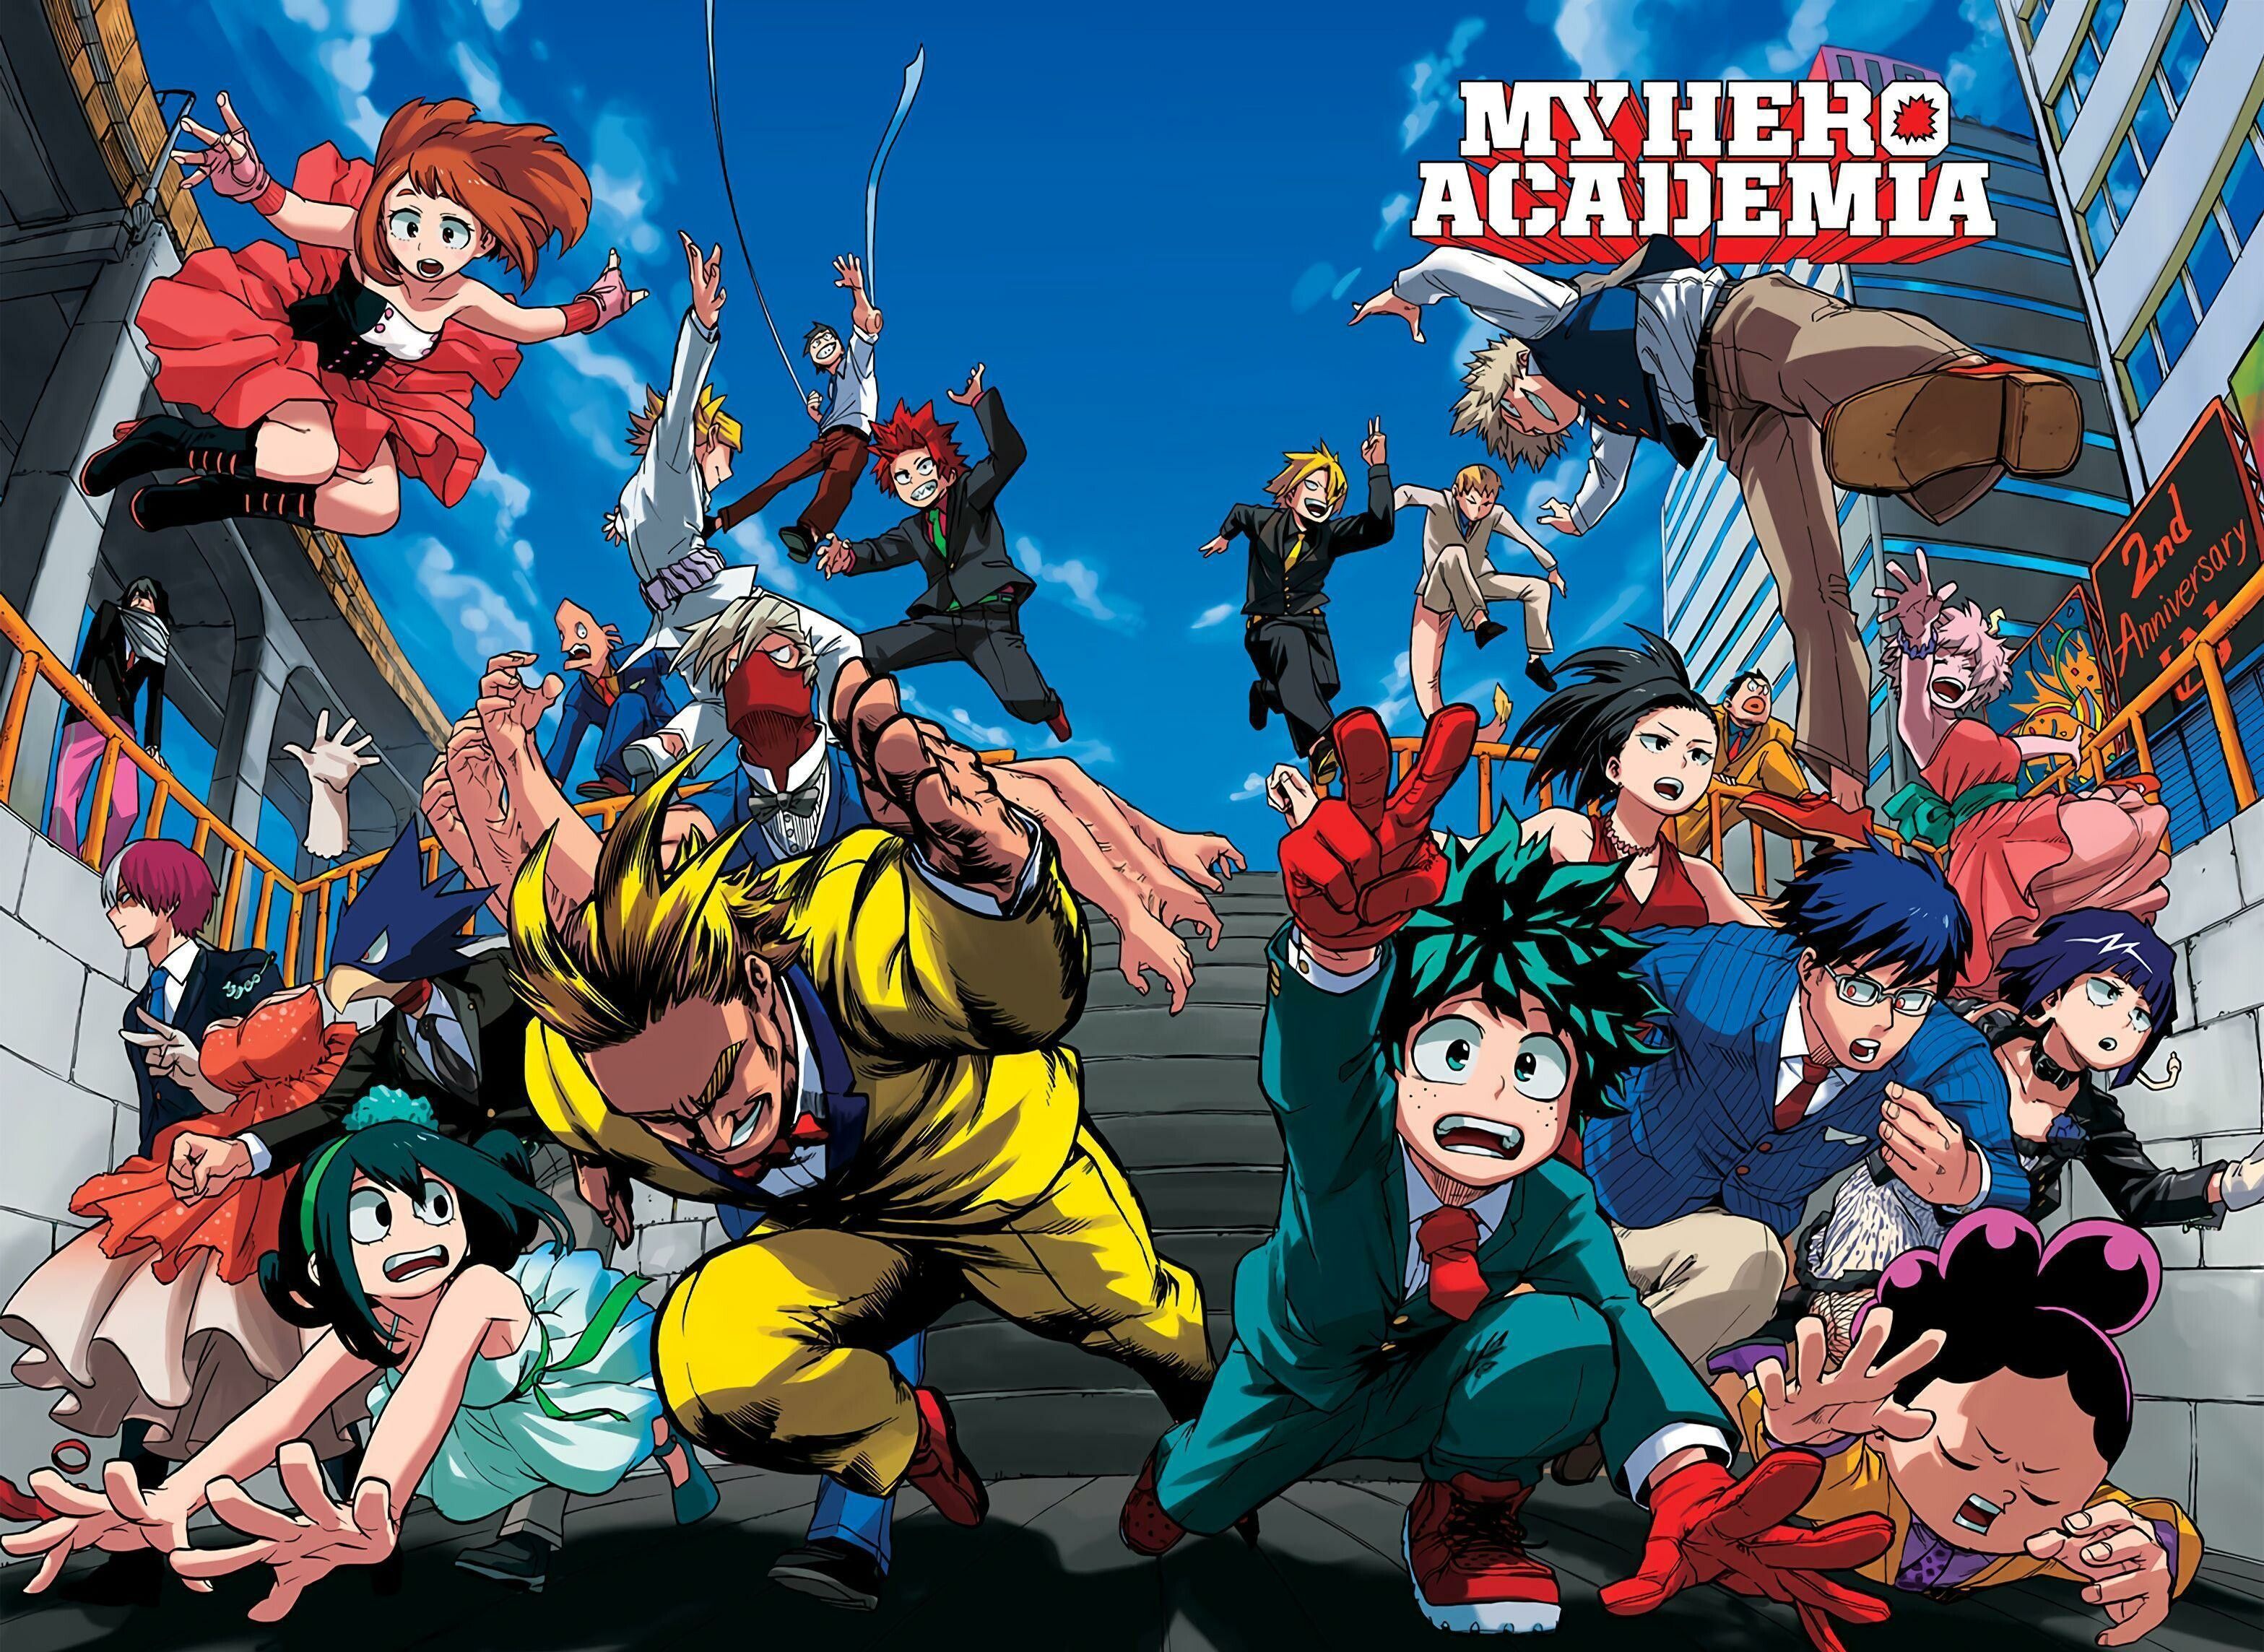 My Hero Academia 4K Wallpaper: HD, 4K, 5K for PC and Mobile. Download free image for iPhone, Android